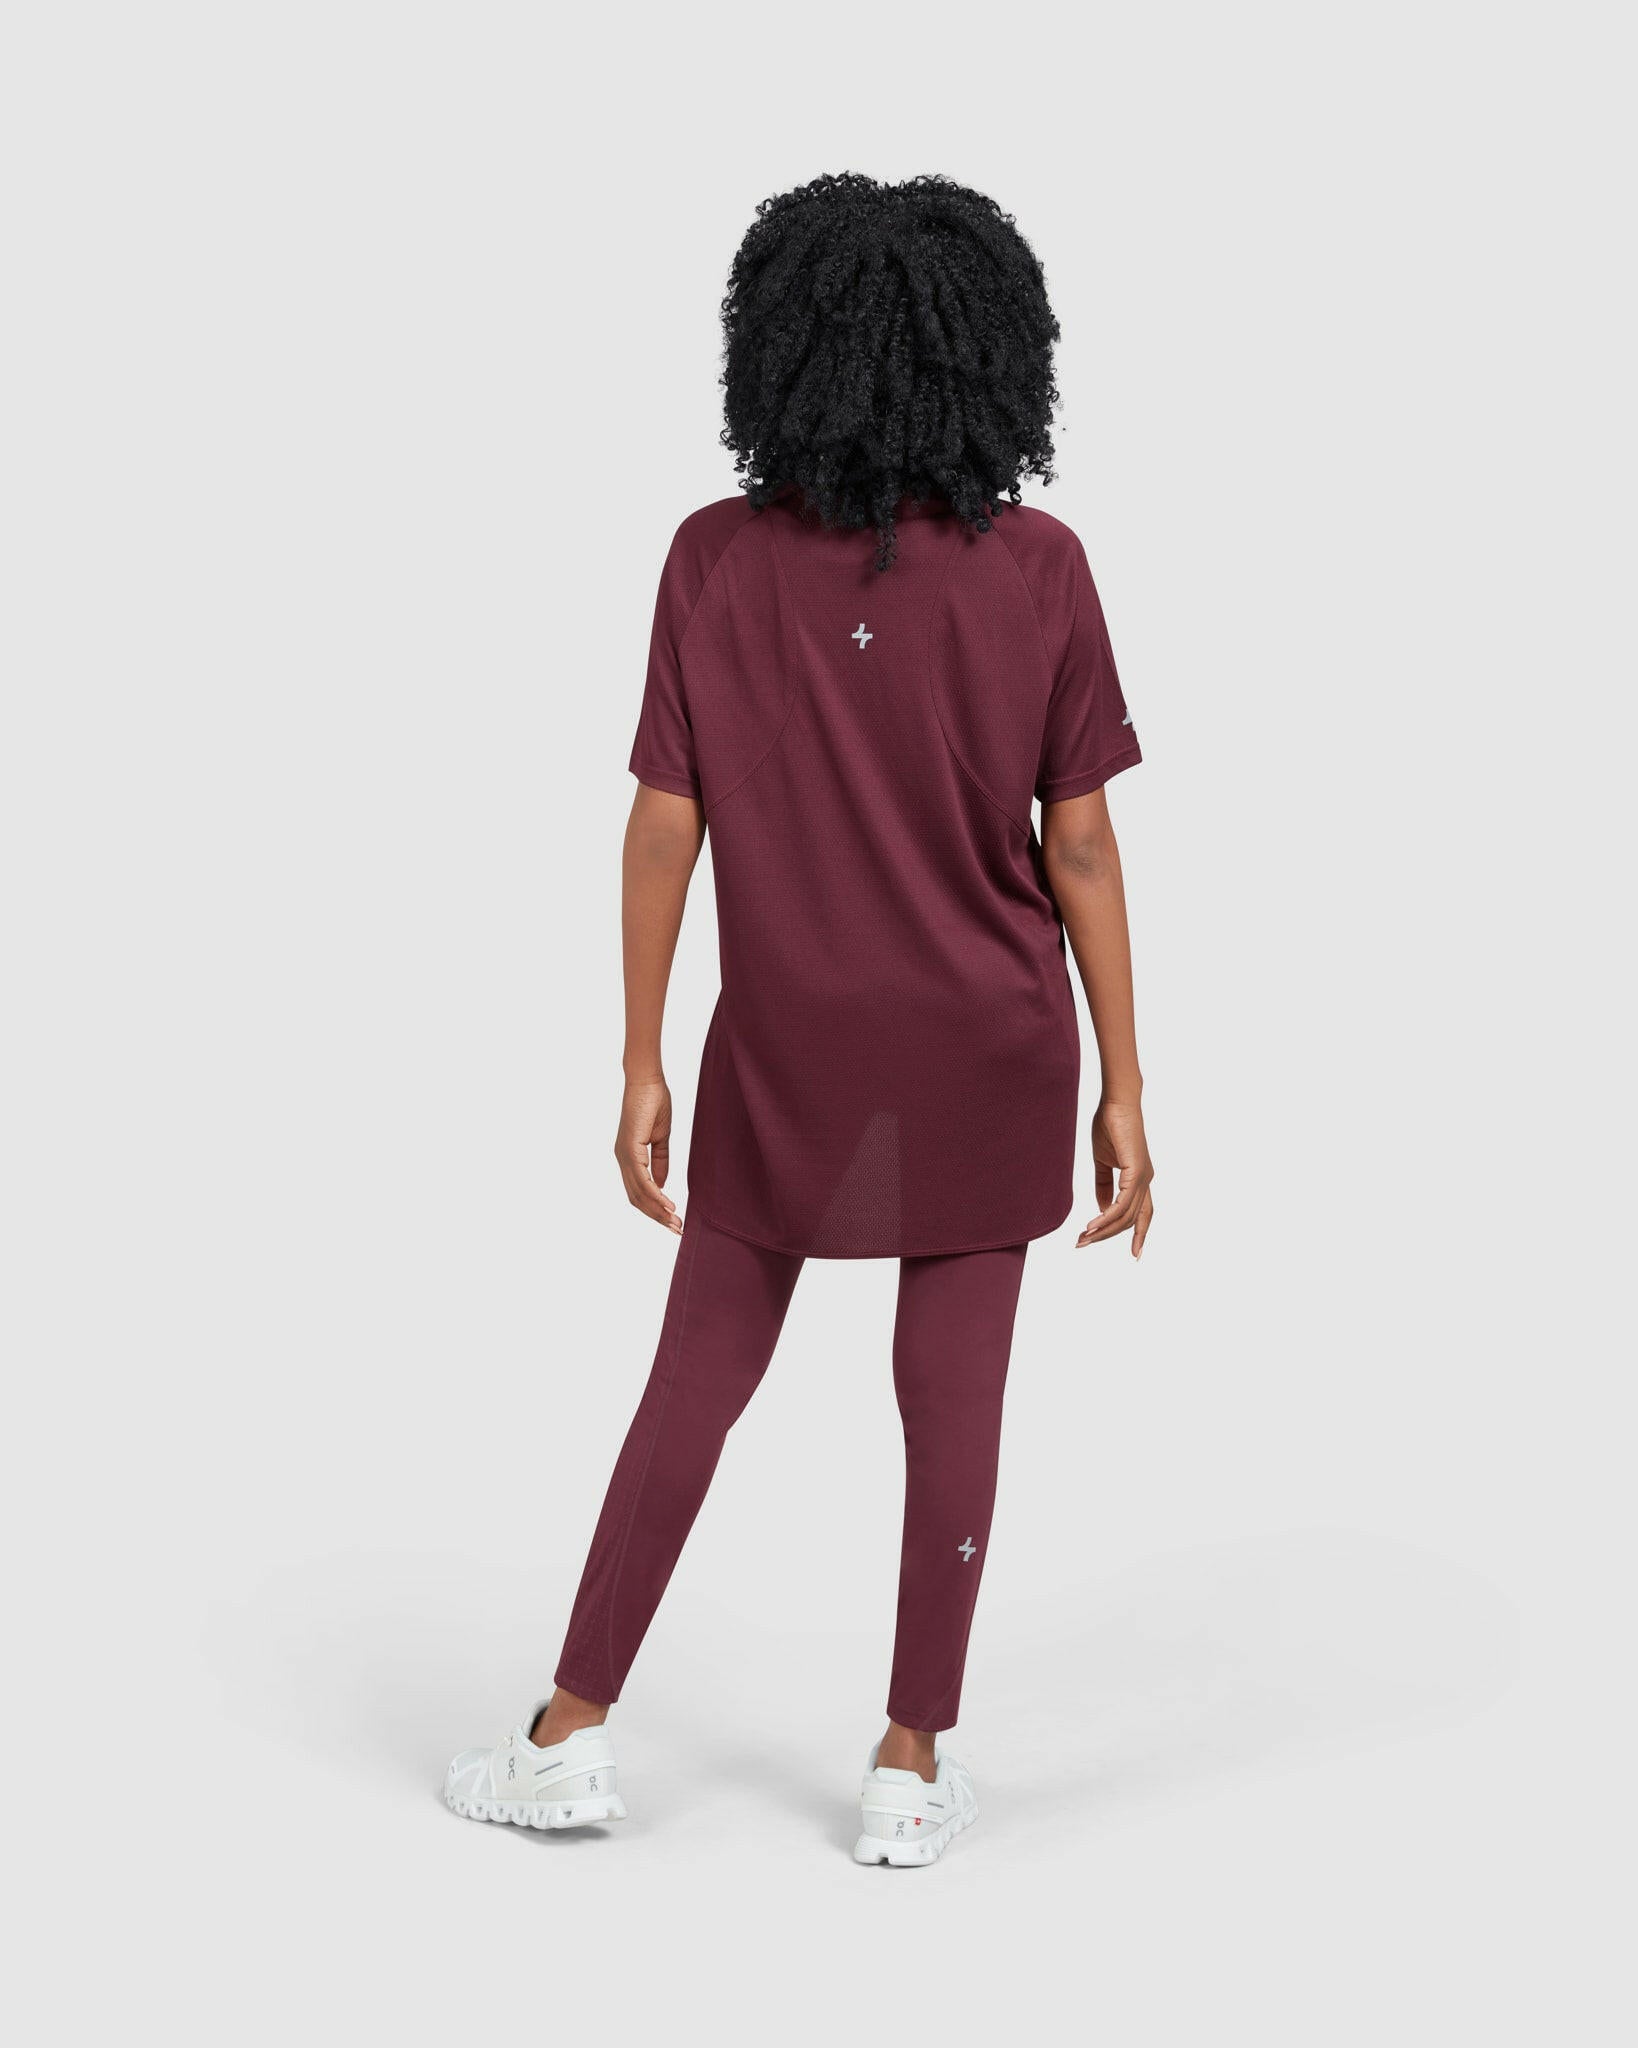 Woman seen from behind, wearing a maroon short-sleeved BREATHE T-SHIRT with Qynda brand logo and matching leggings, paired with white sneakers for maximum breathability.